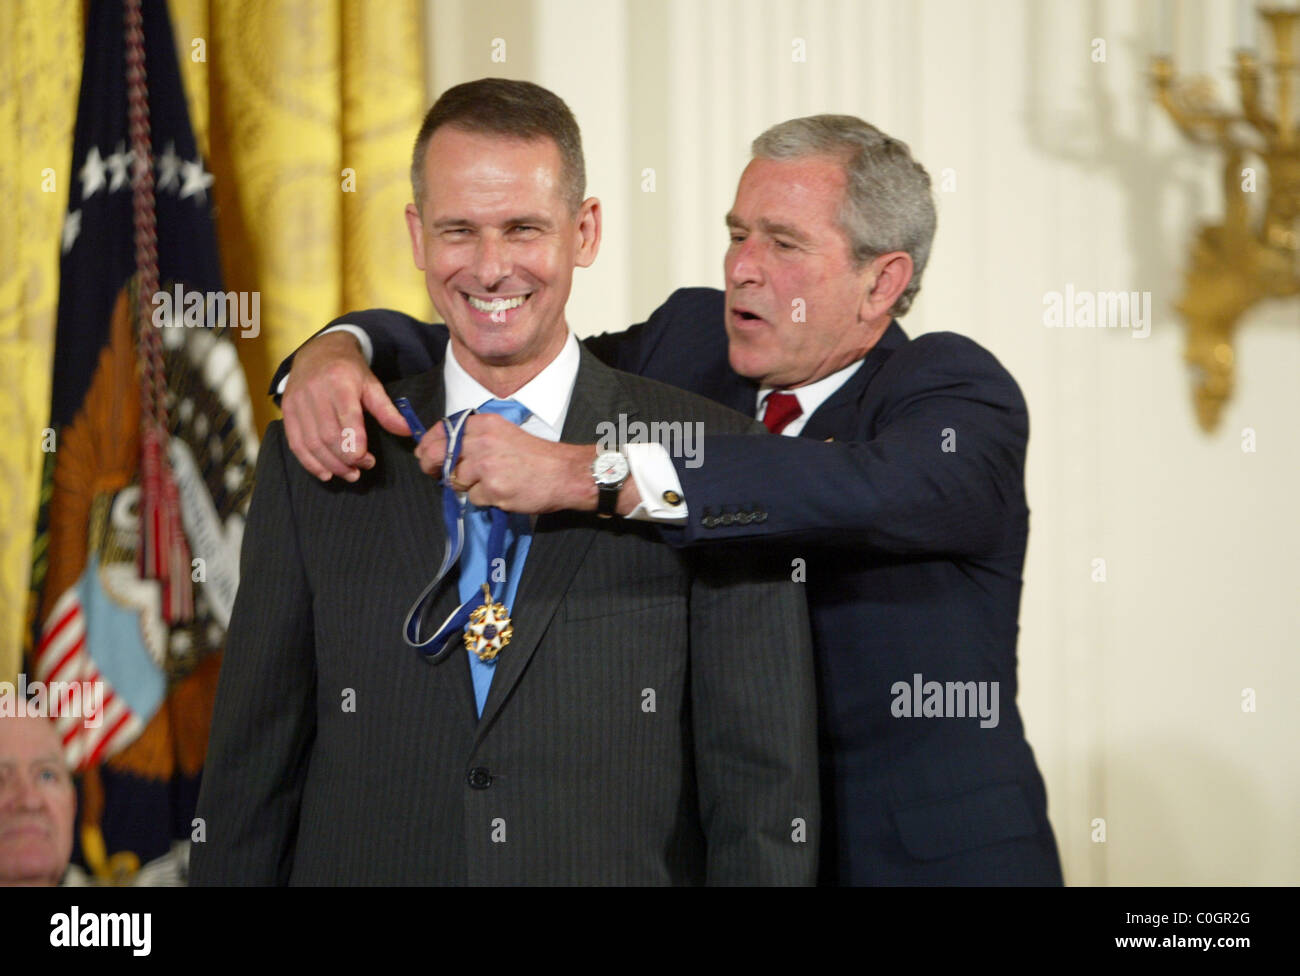 President George W Bush presents the Medal of Freedom to General Peter Pace The US President presented the Medal of Freedom in Stock Photo